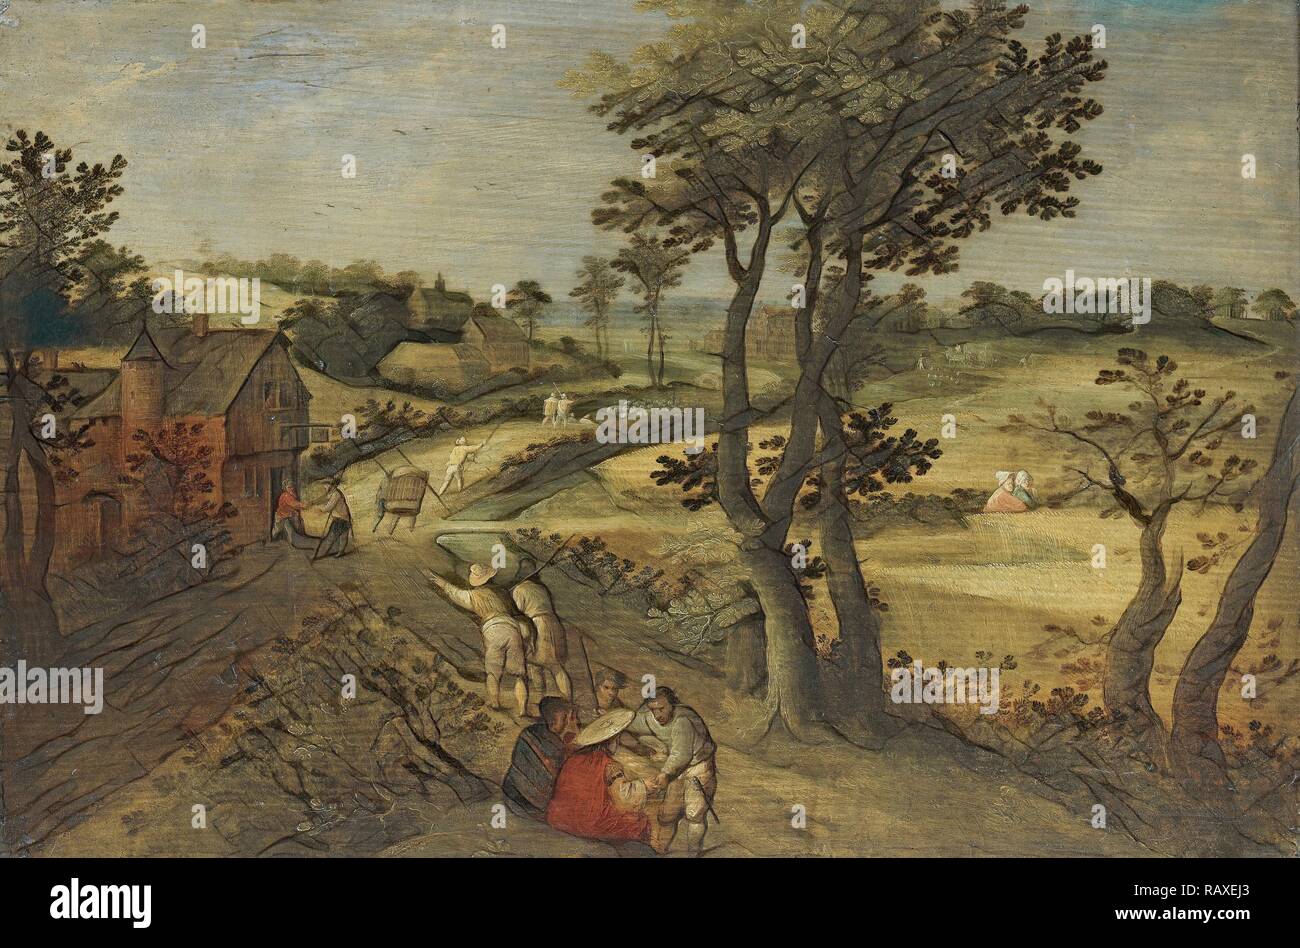 Landscape with Corn Fields, attributed to Jacob Savery (II), 1602 - 1630. Reimagined by Gibon. Classic art with a reimagined Stock Photo